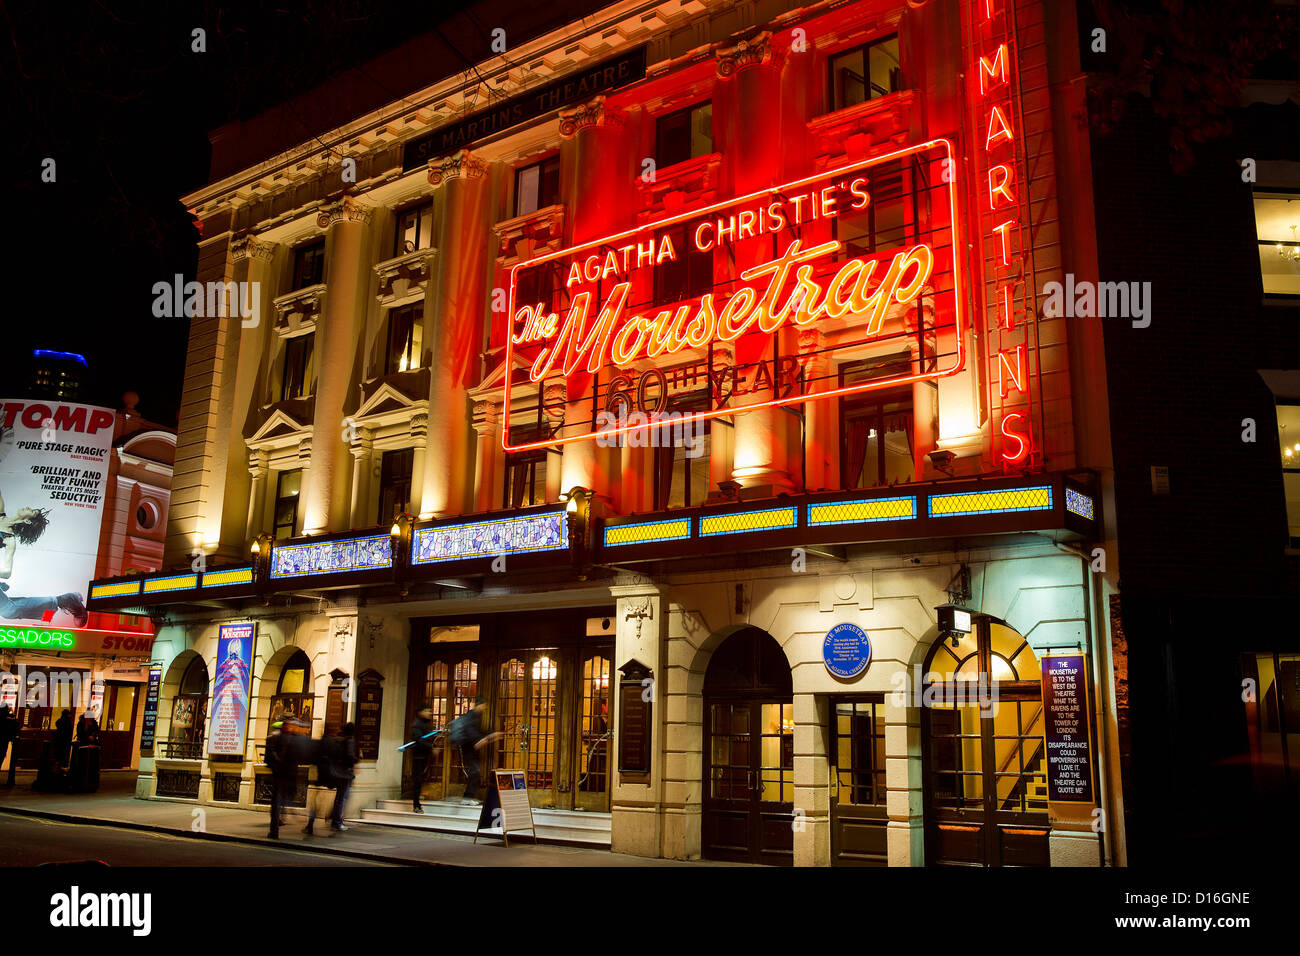 The Mouse trap show at the St Martin's theatre in London Stock Photo